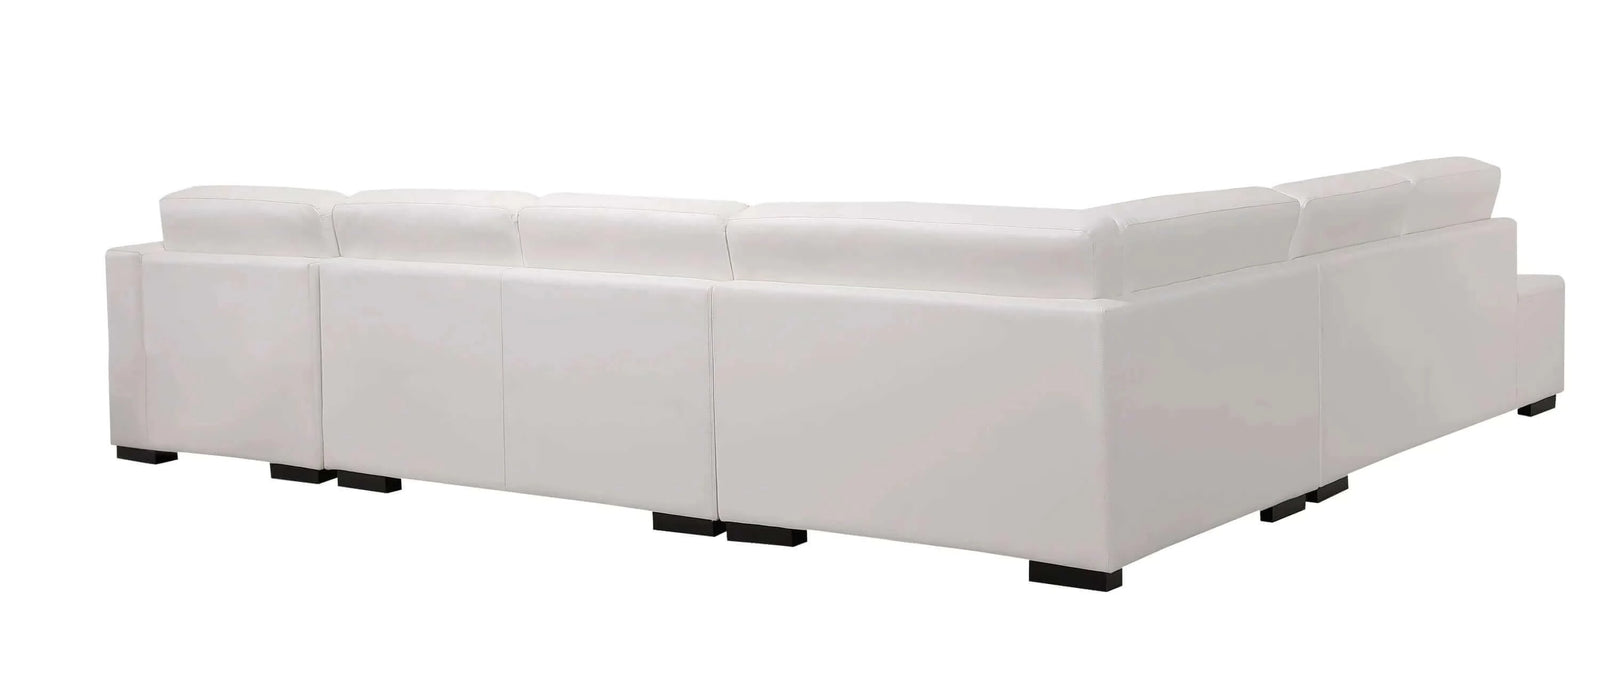 Buy lounge set luxurious 6 seater bonded leather corner sofa living room couch in white with chaise - upinteriors-Upinteriors